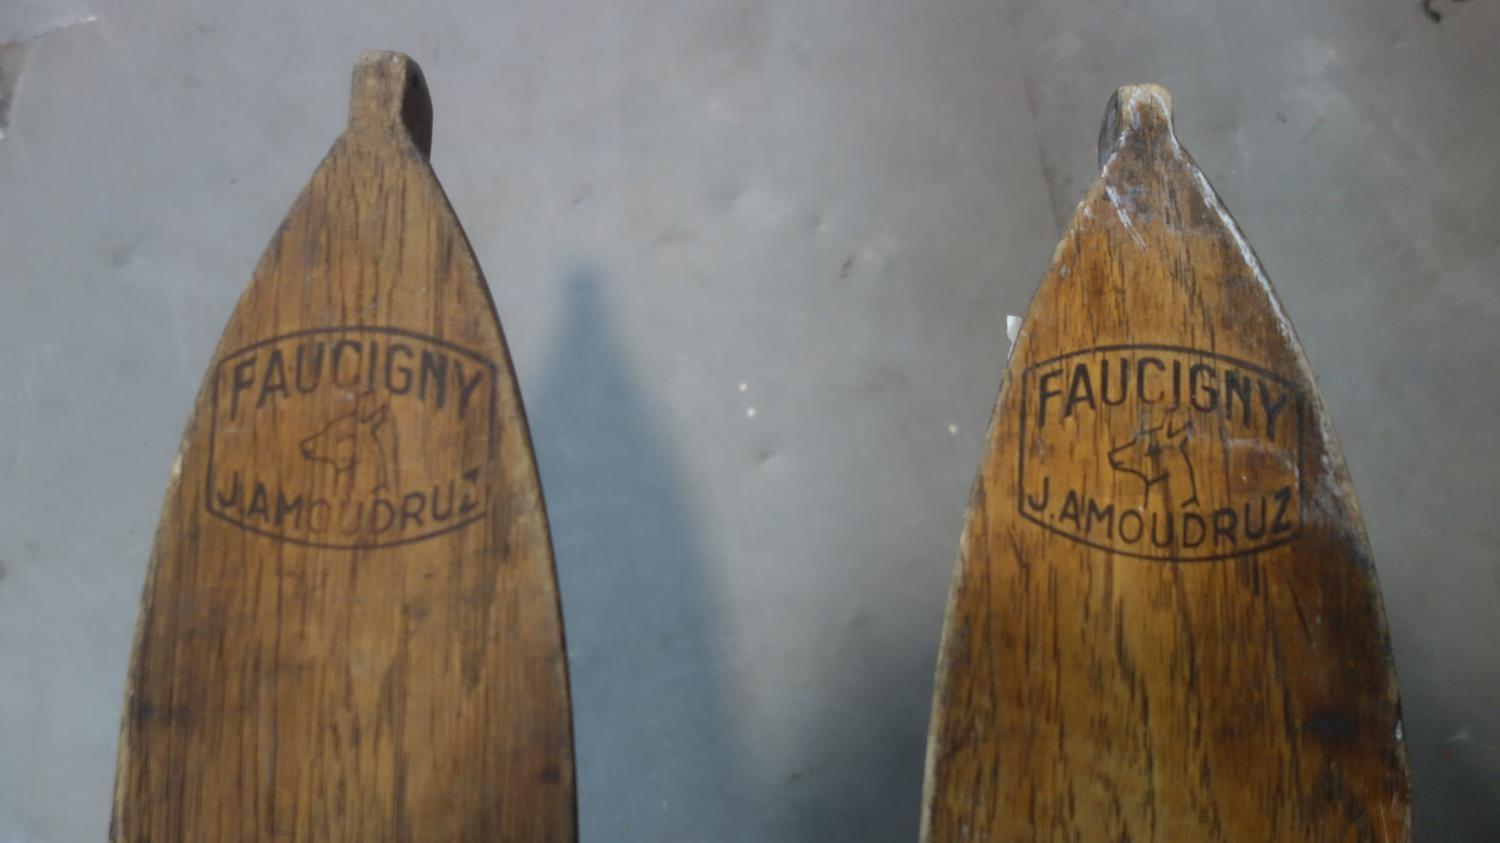 A pair of vintage oak skis inlcuding ski poles by Faucigny J. Amoudruz - Image 9 of 11